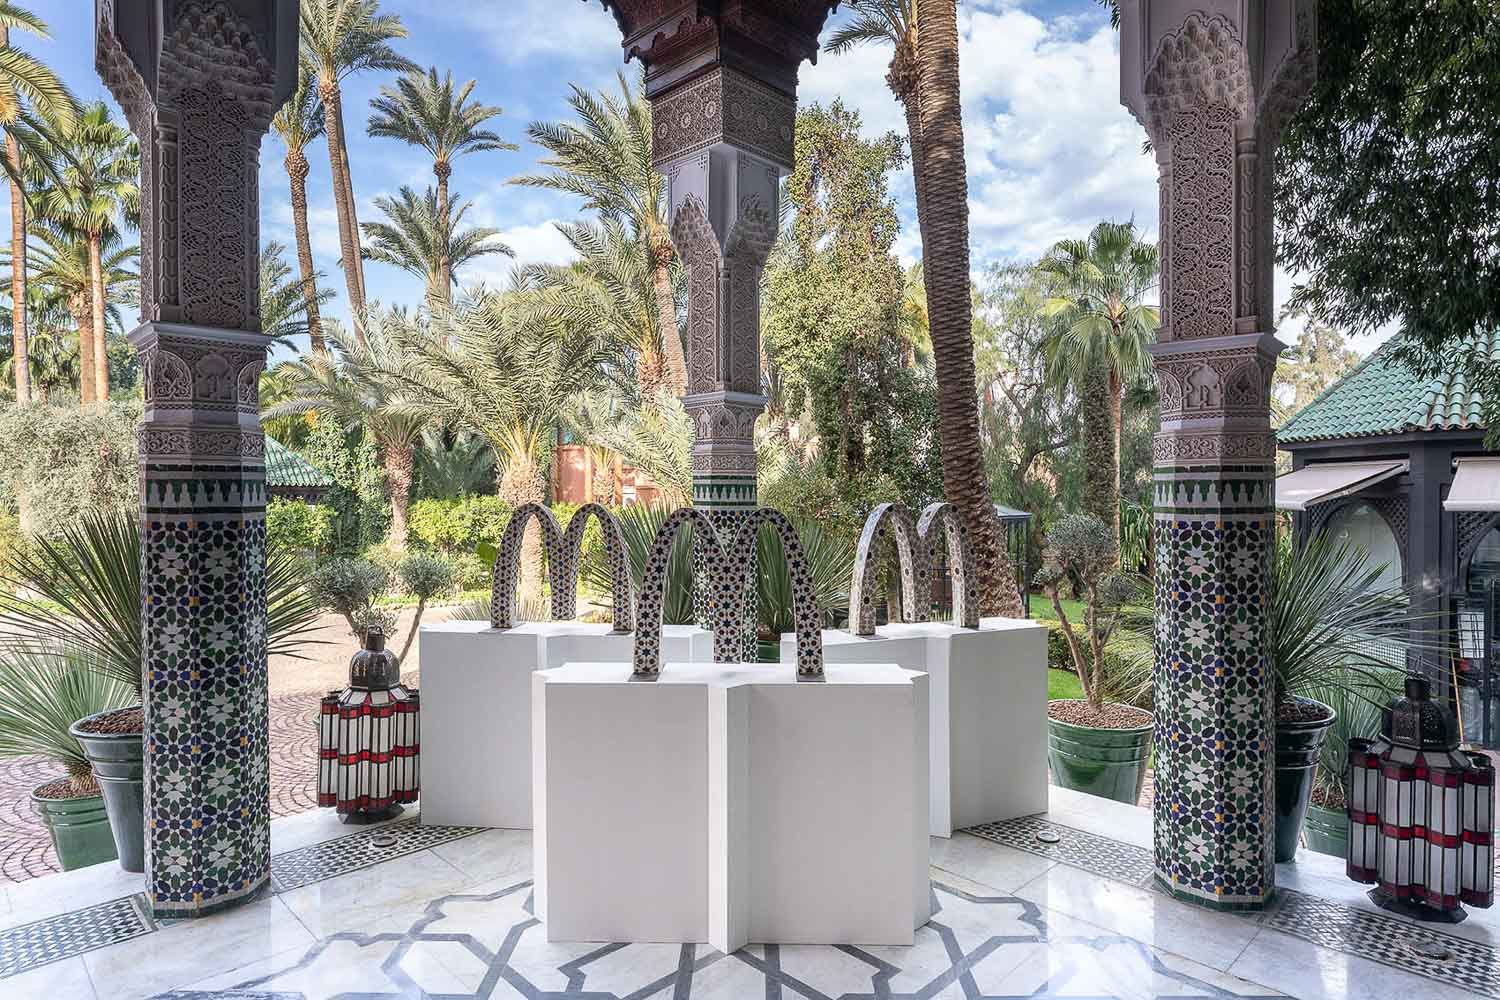 IDEAT Magazin 1 54 Marrakech 2020. Courtesy of 1 54 and Nicolas Brasseur Say Who